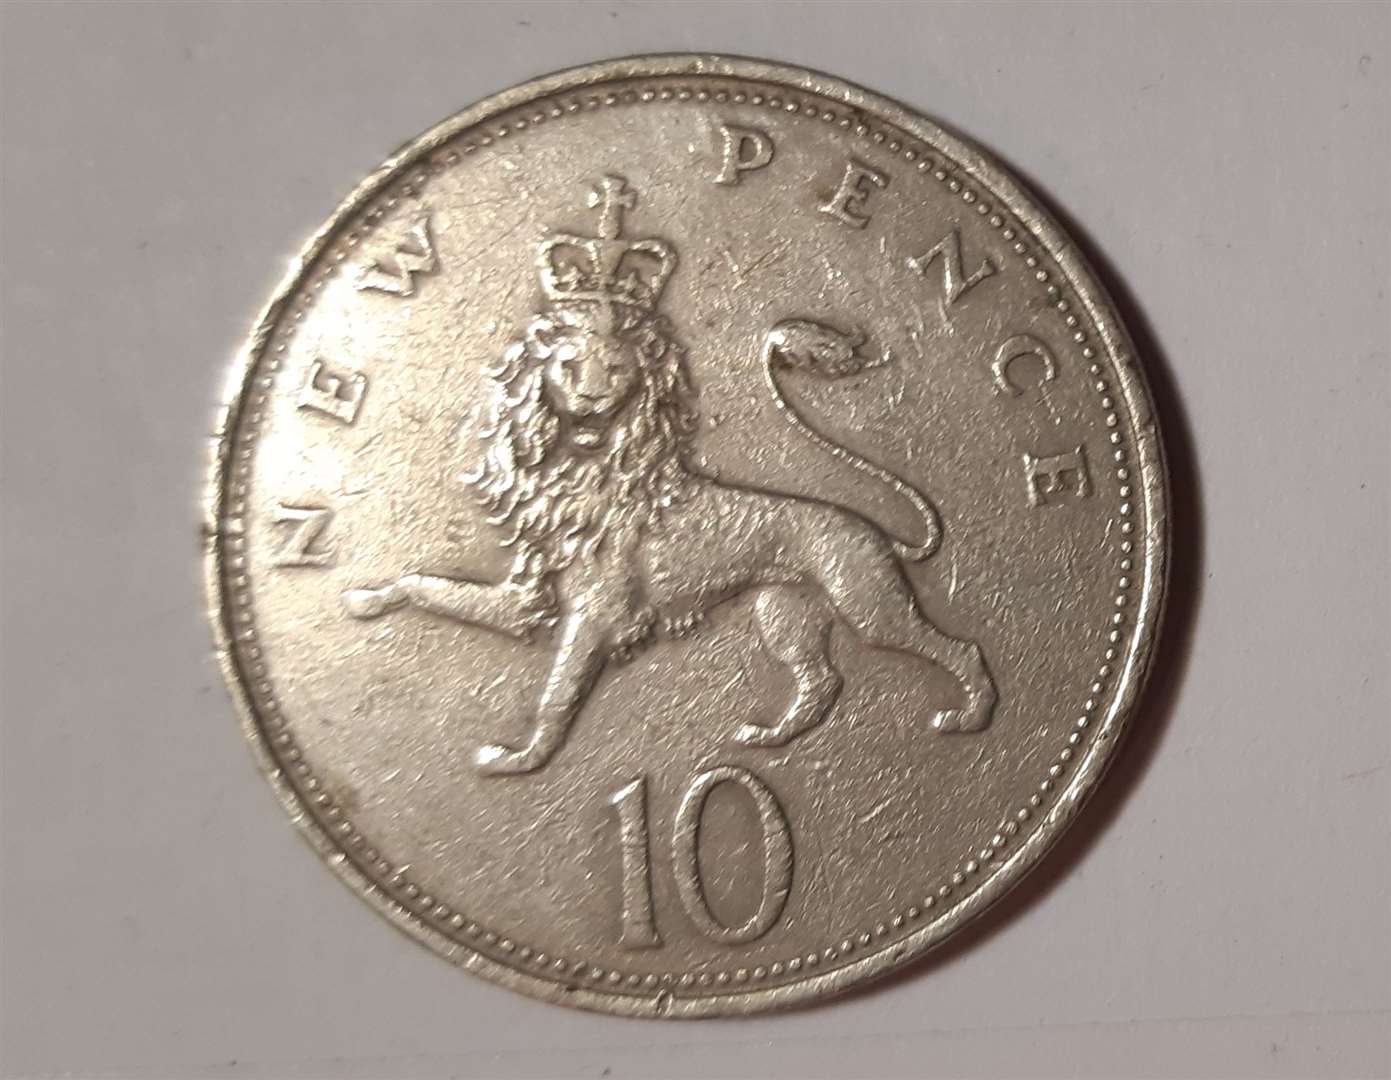 The new pence 10p minted in 1968